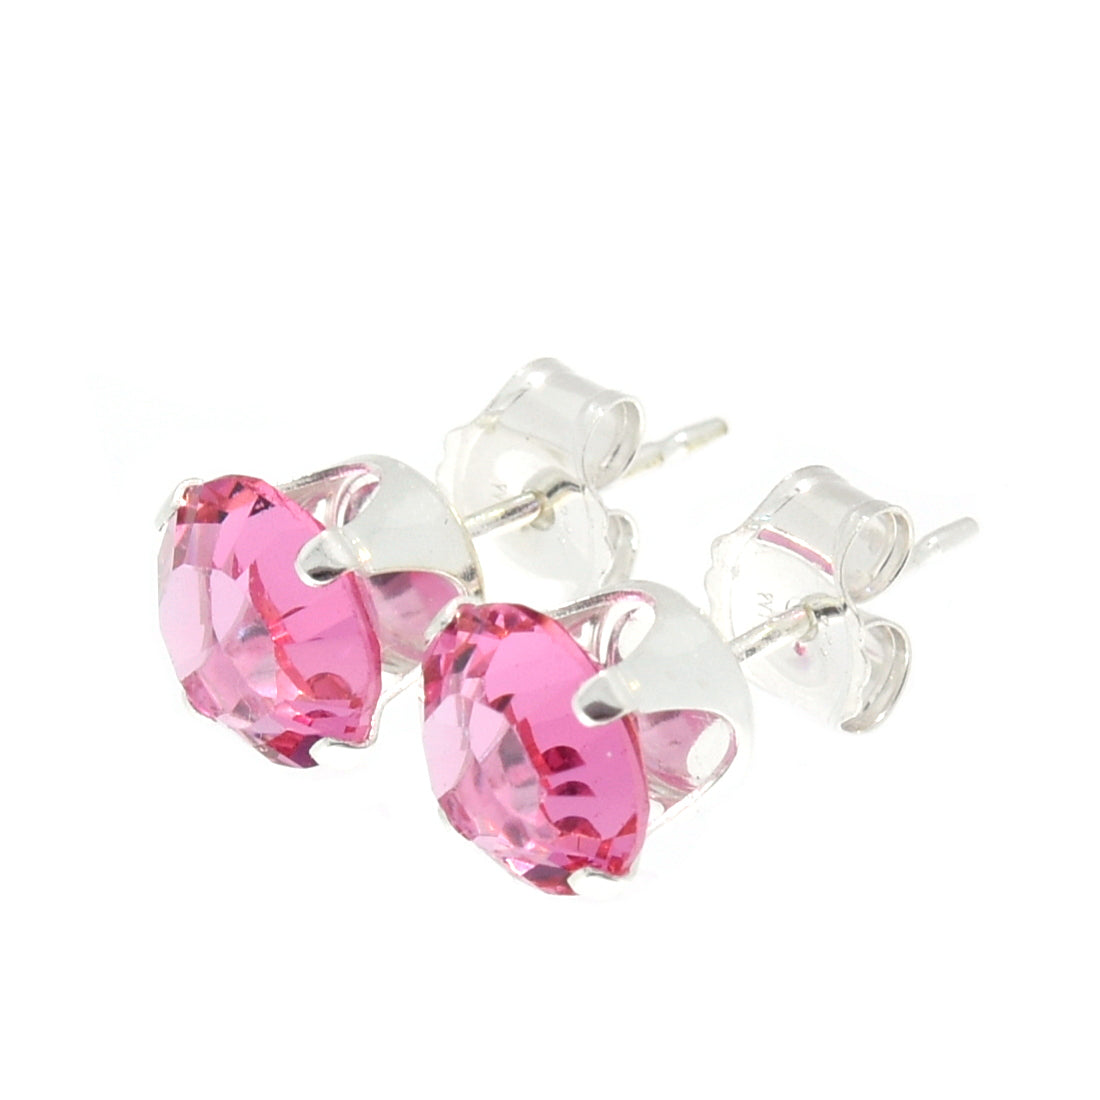 pewterhooter® Women's Classic Collection 925 Sterling silver earrings with sparkling Rose Pink channel crystals, packaged in a gift box for any occasion.